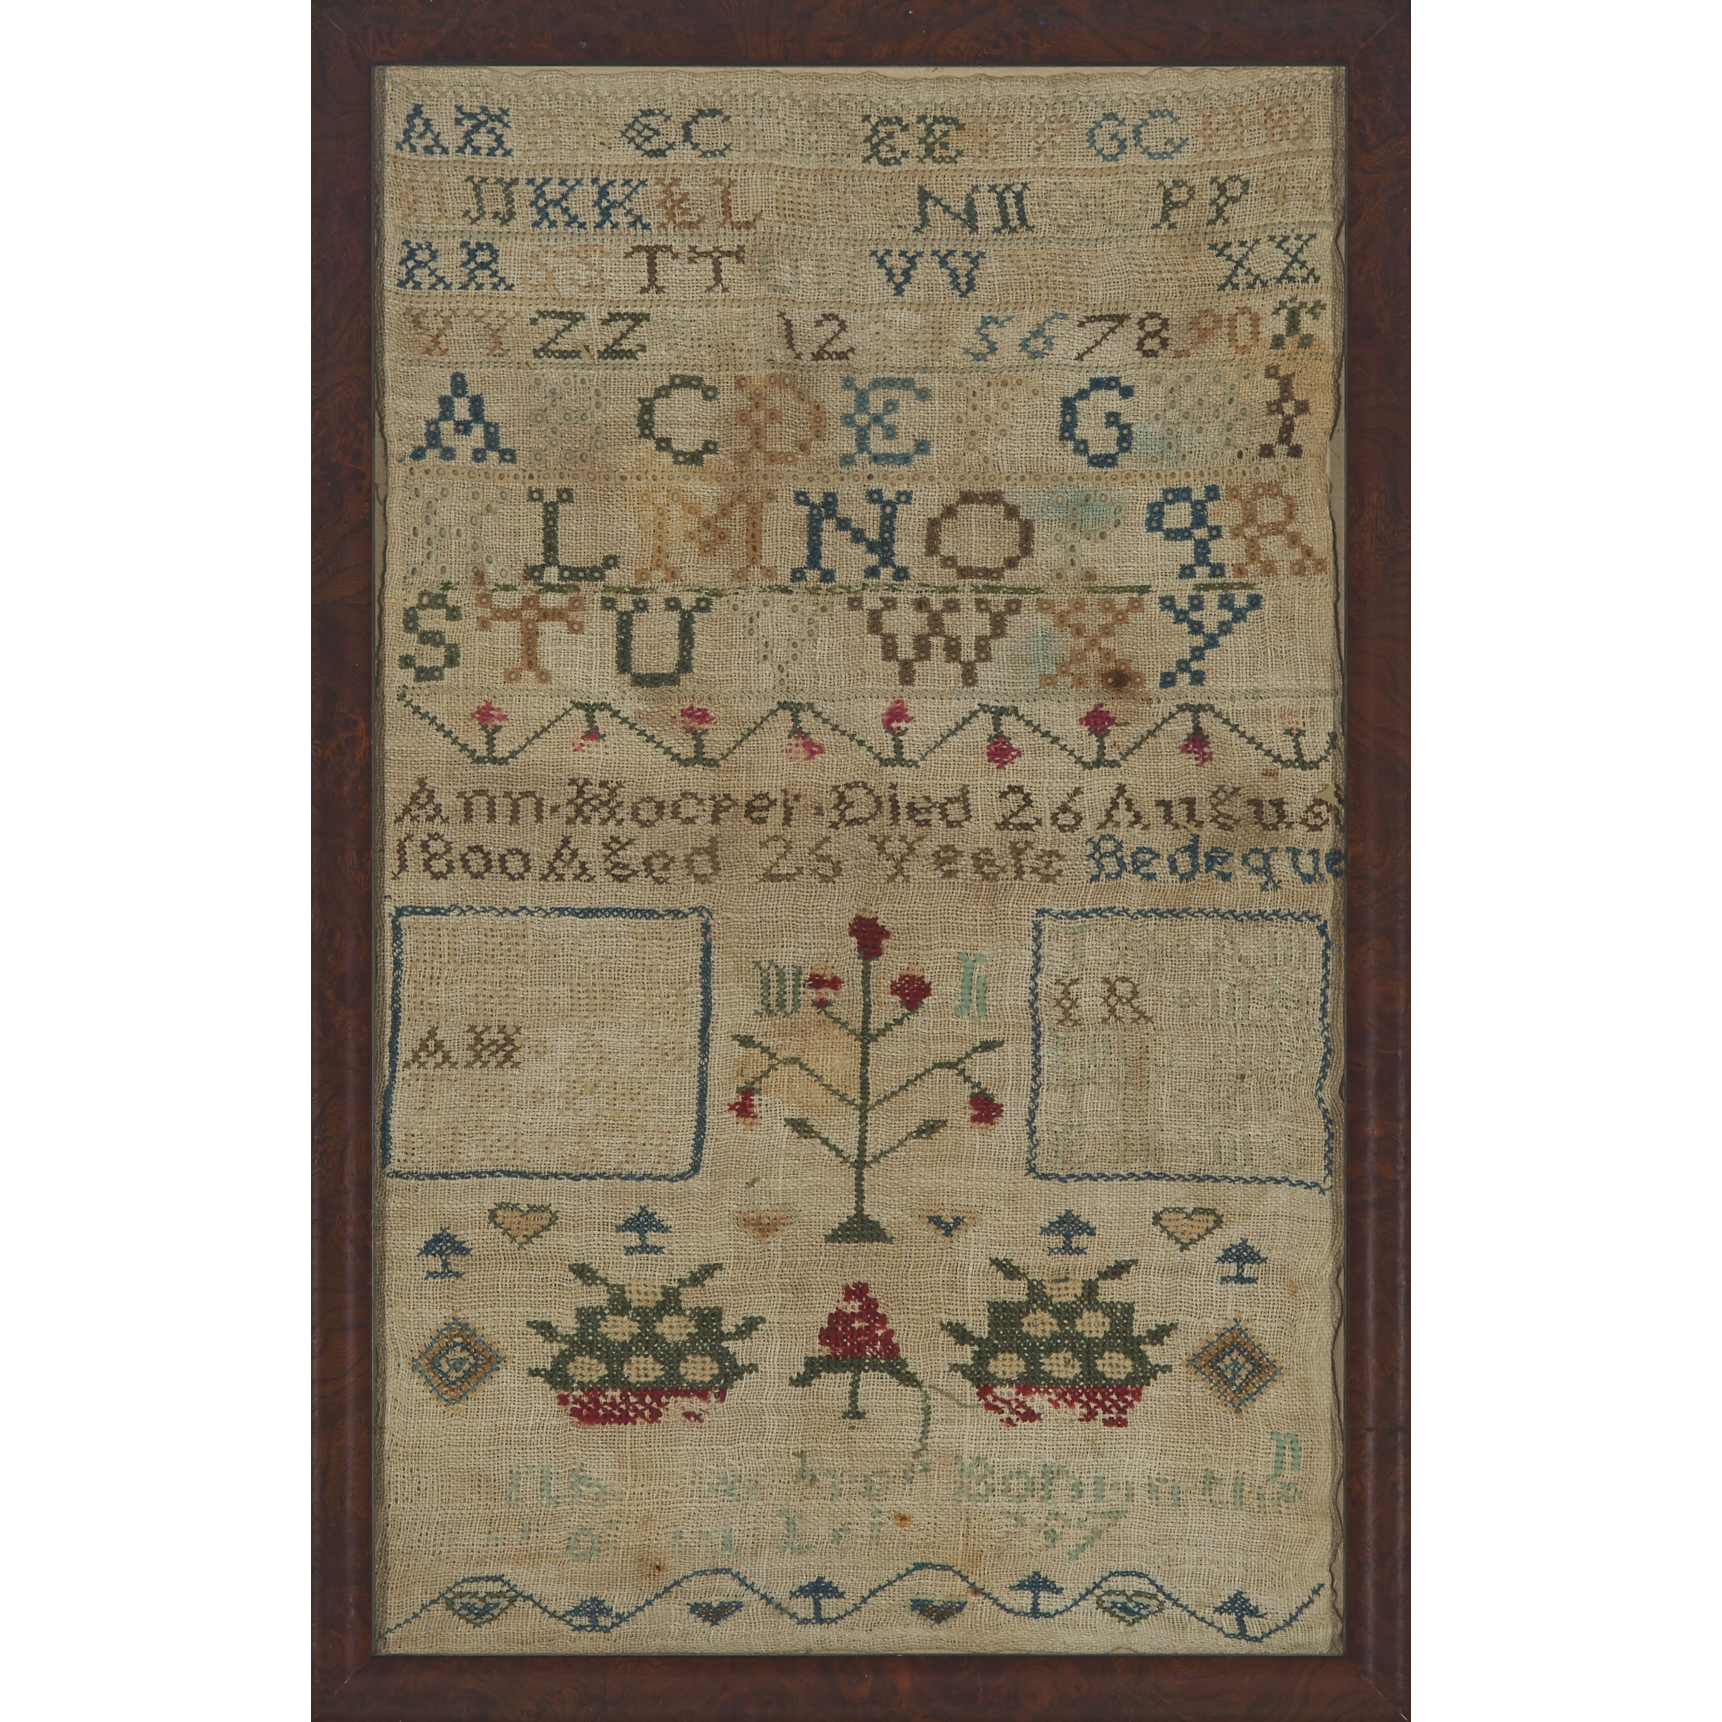 Early Prince Edward Island Memorial Sampler to Ann Hooper, Died 26 August, Bedeque, 1800